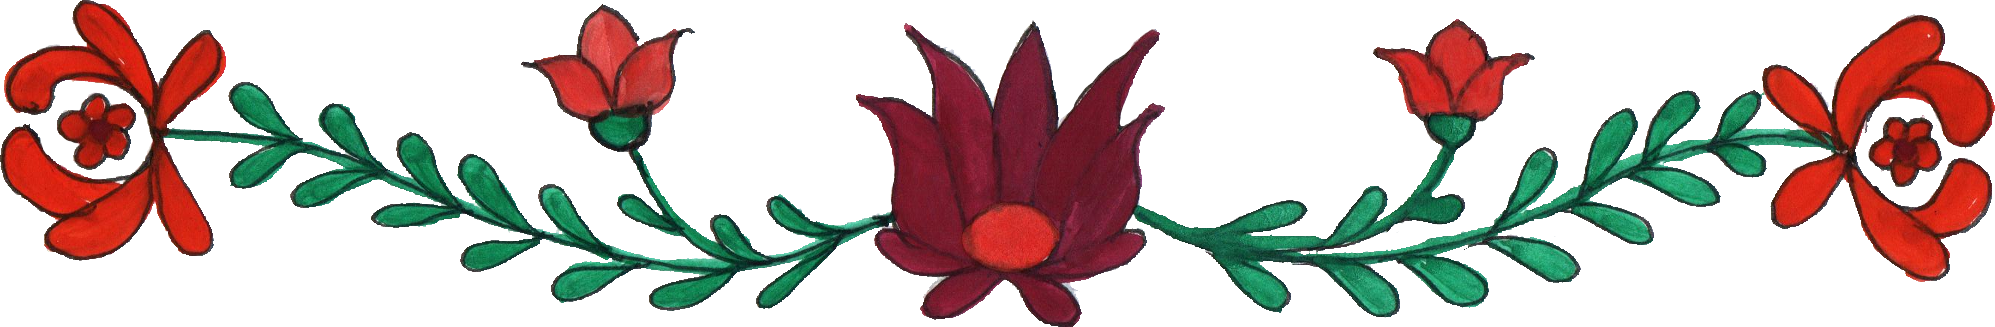 Lotus clipart border.  flower drawing png